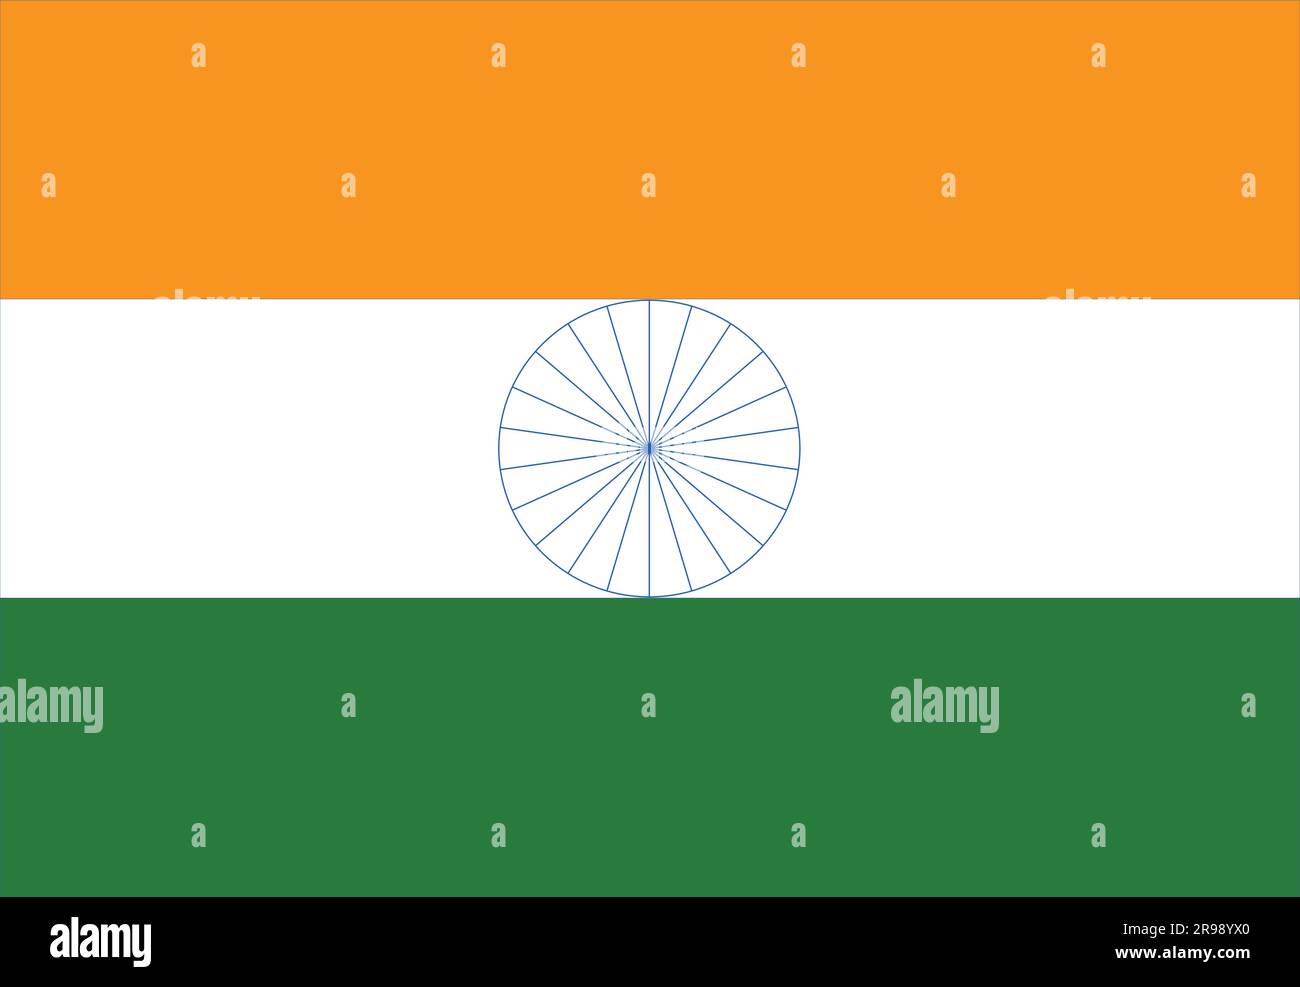 Independence Day 2022: Did you know flag hoisting on August 15 is different  from January 26? Know why and how